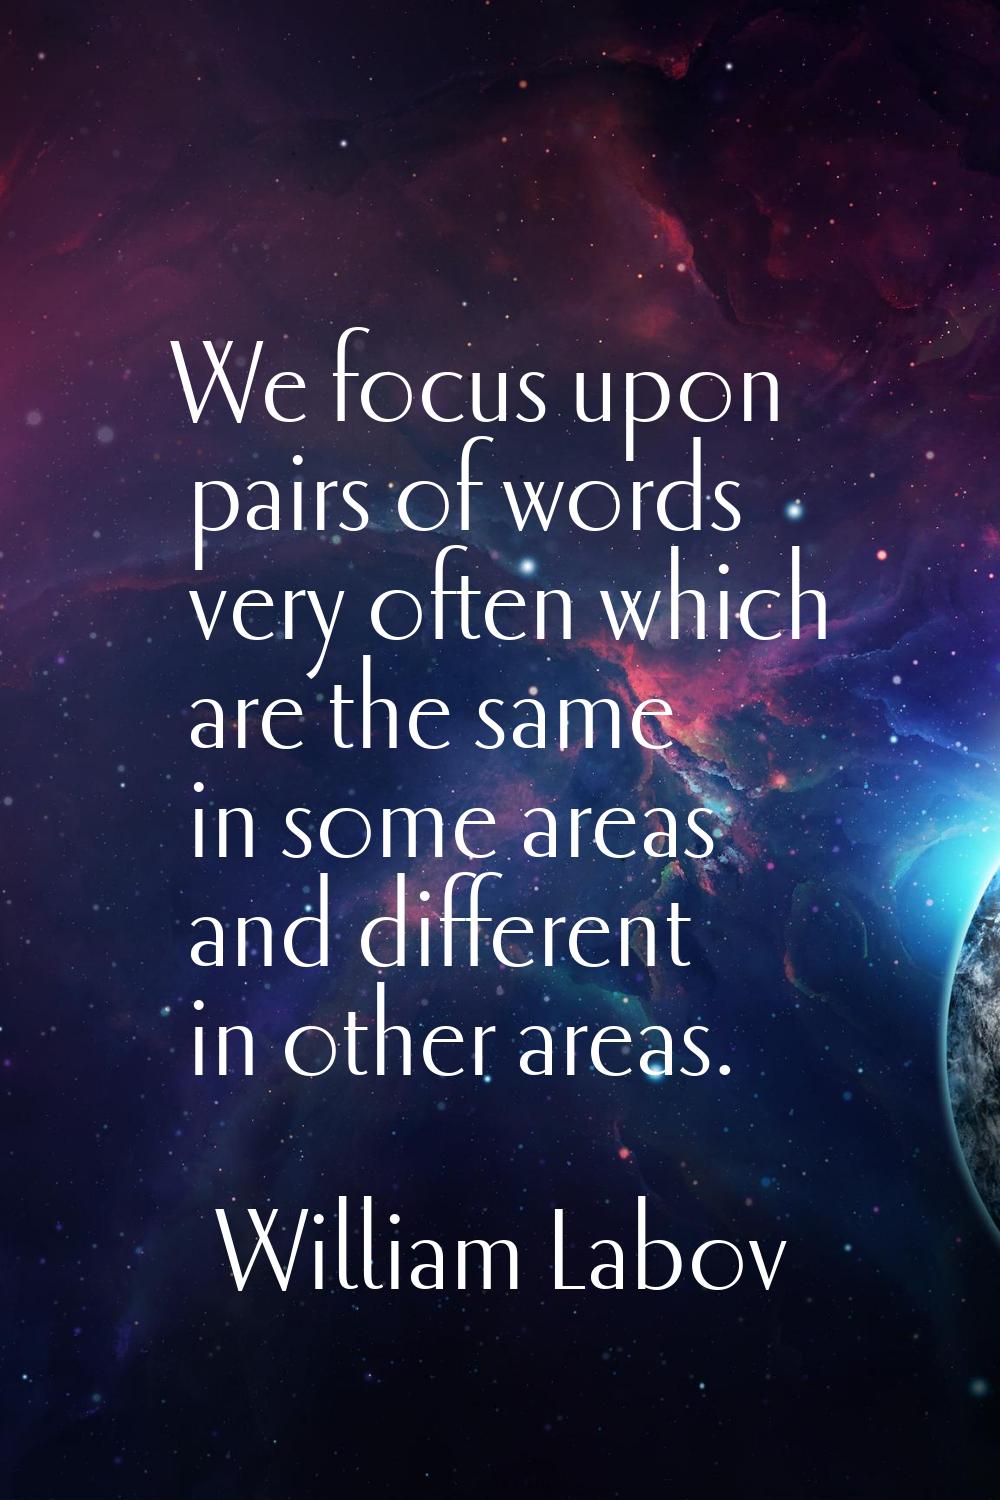 We focus upon pairs of words very often which are the same in some areas and different in other are